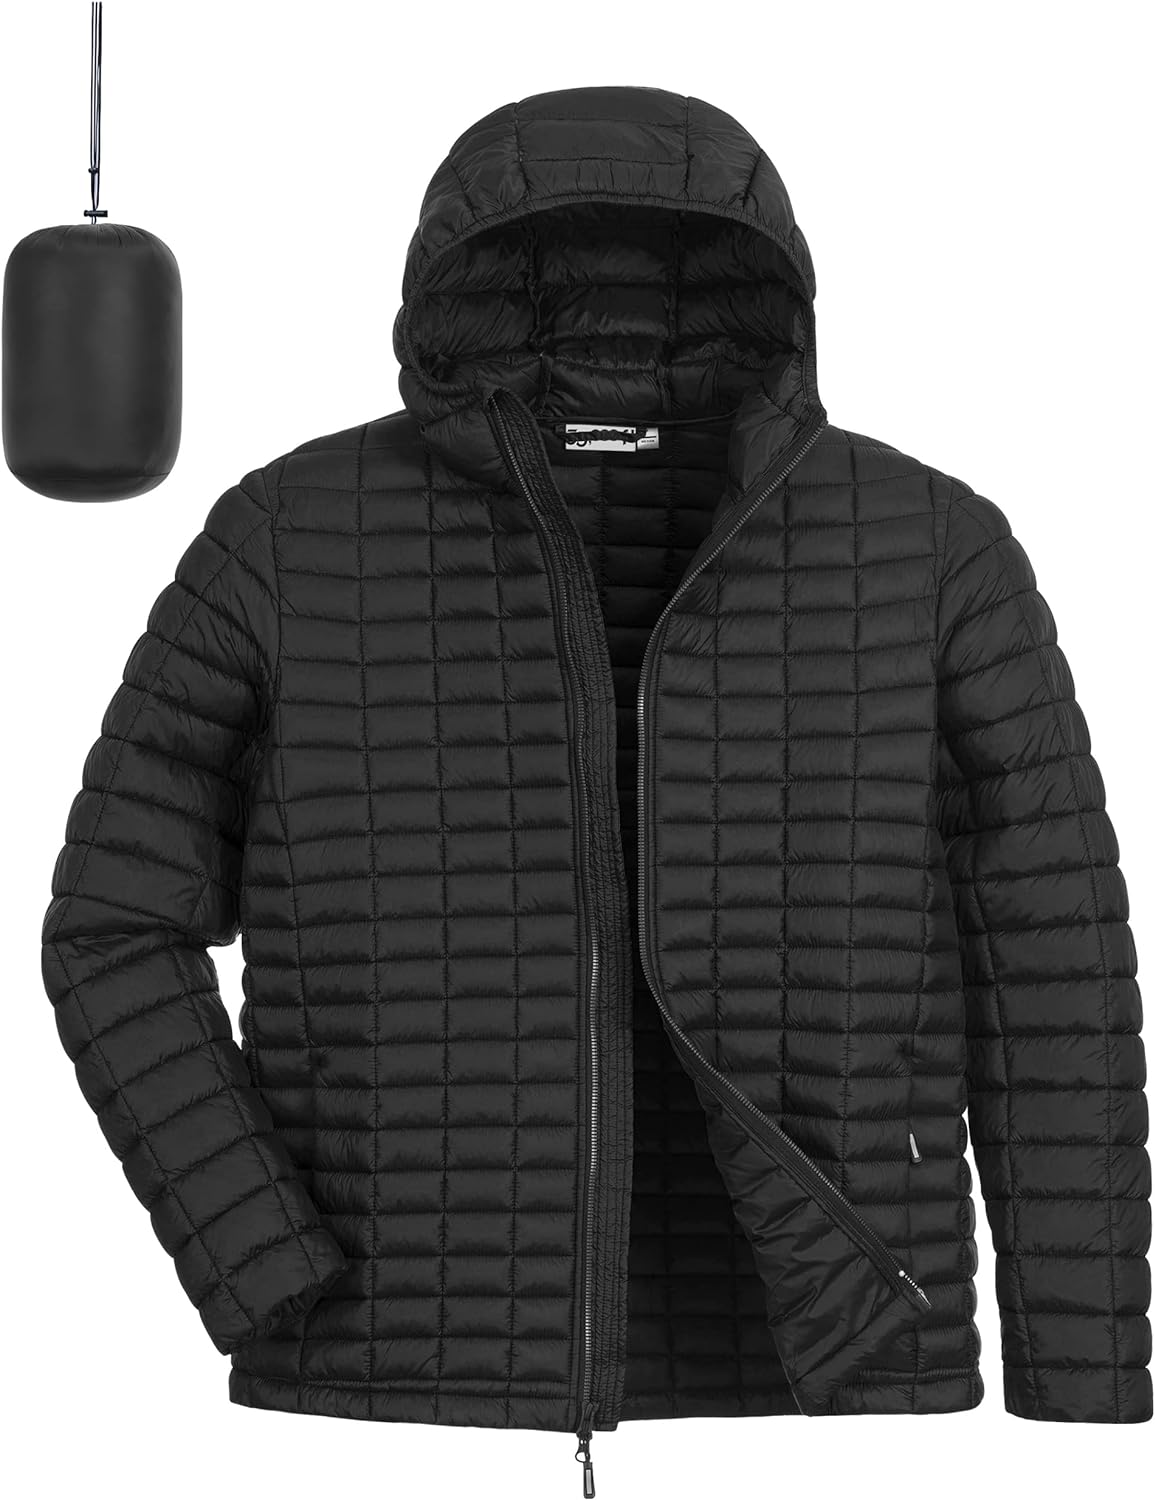 Generic Mens Winter Fashion Front-Zip Thick Quilted Hoodies Warm Down Jacket Coat